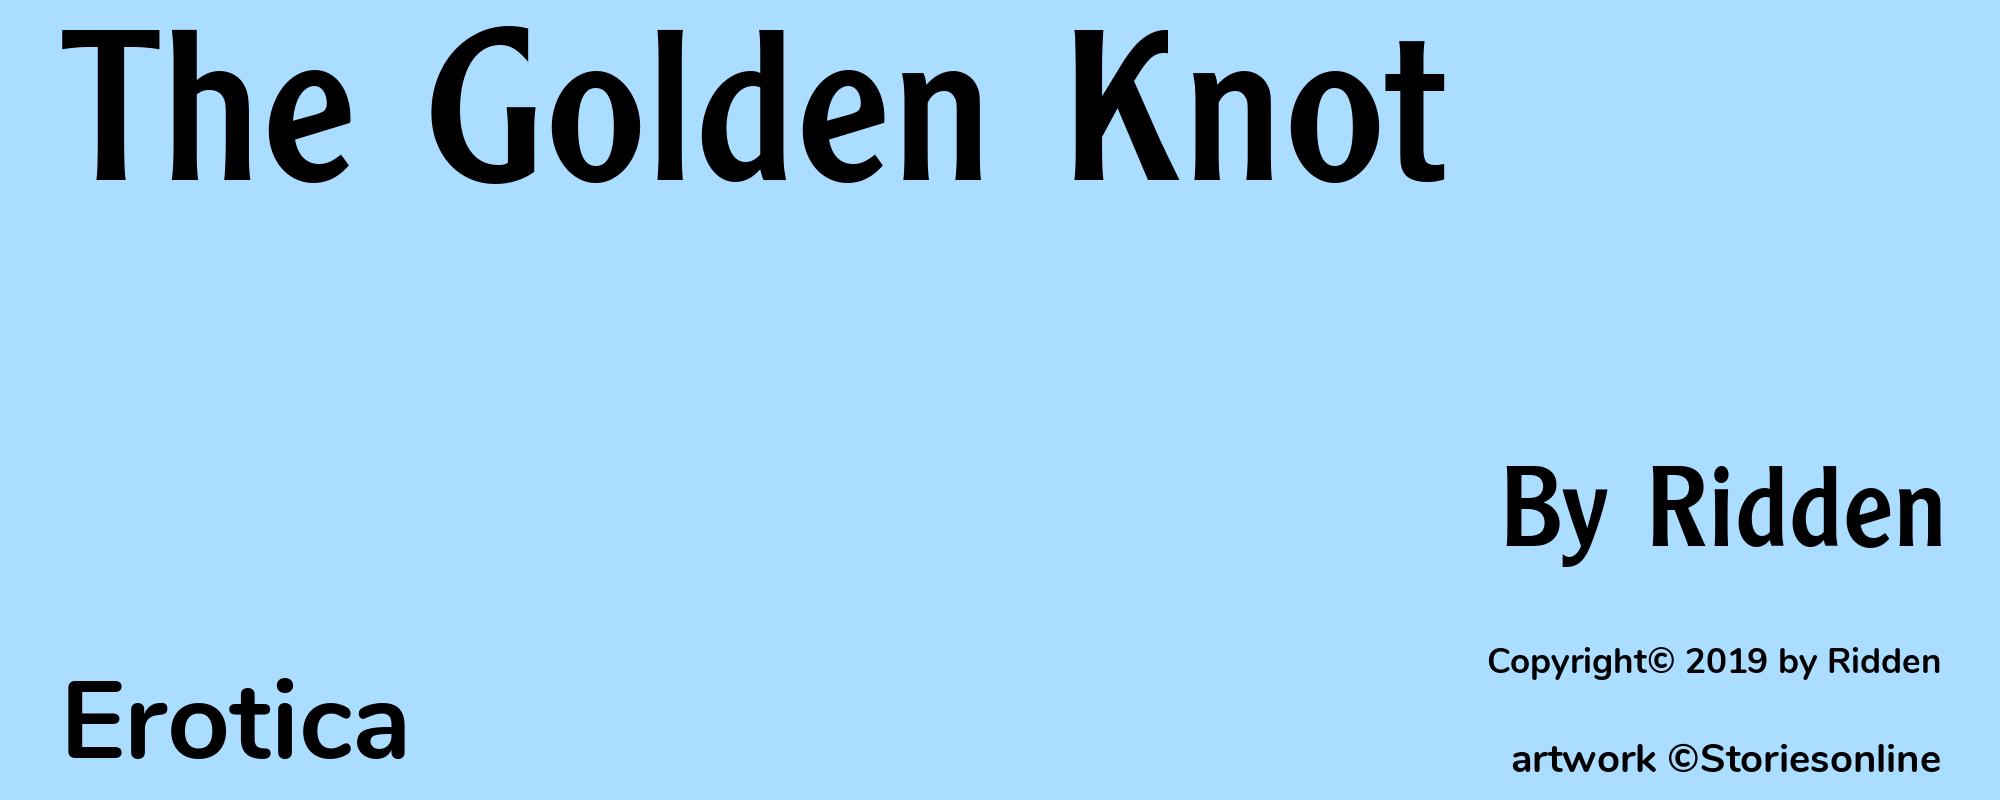 The Golden Knot - Cover